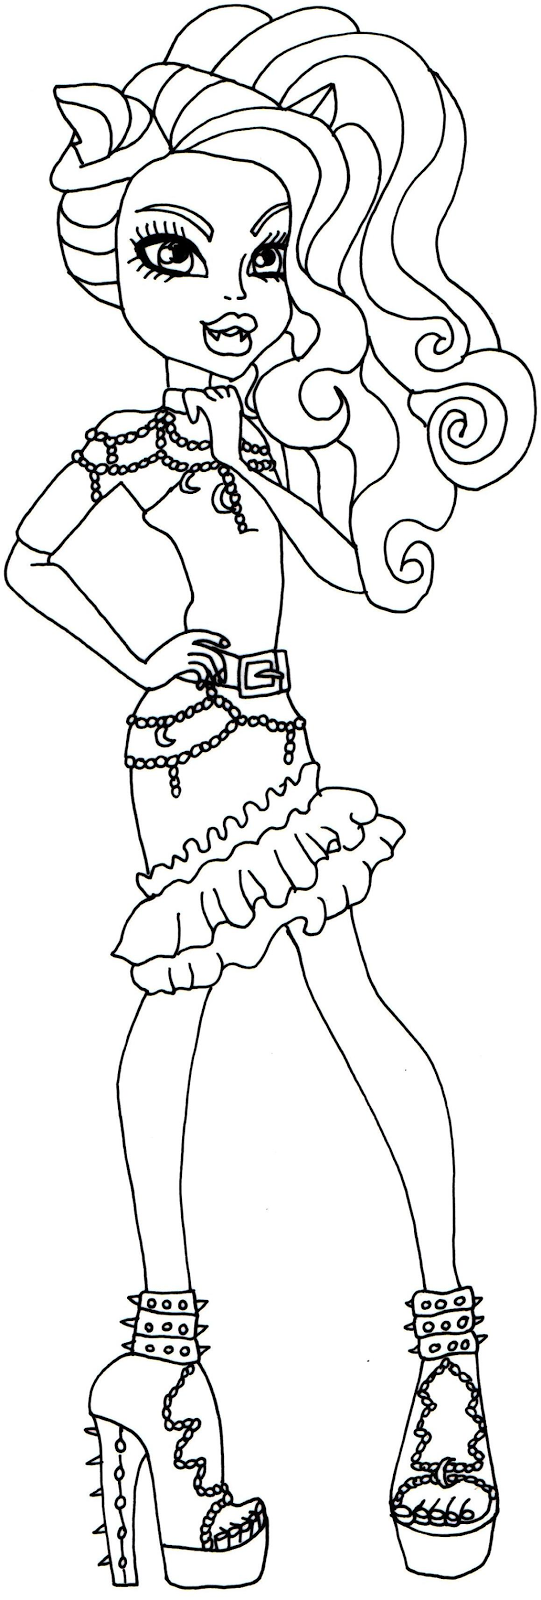 Free Printable Monster High Coloring Pages: Clawdeen Wolf Hauntlywood